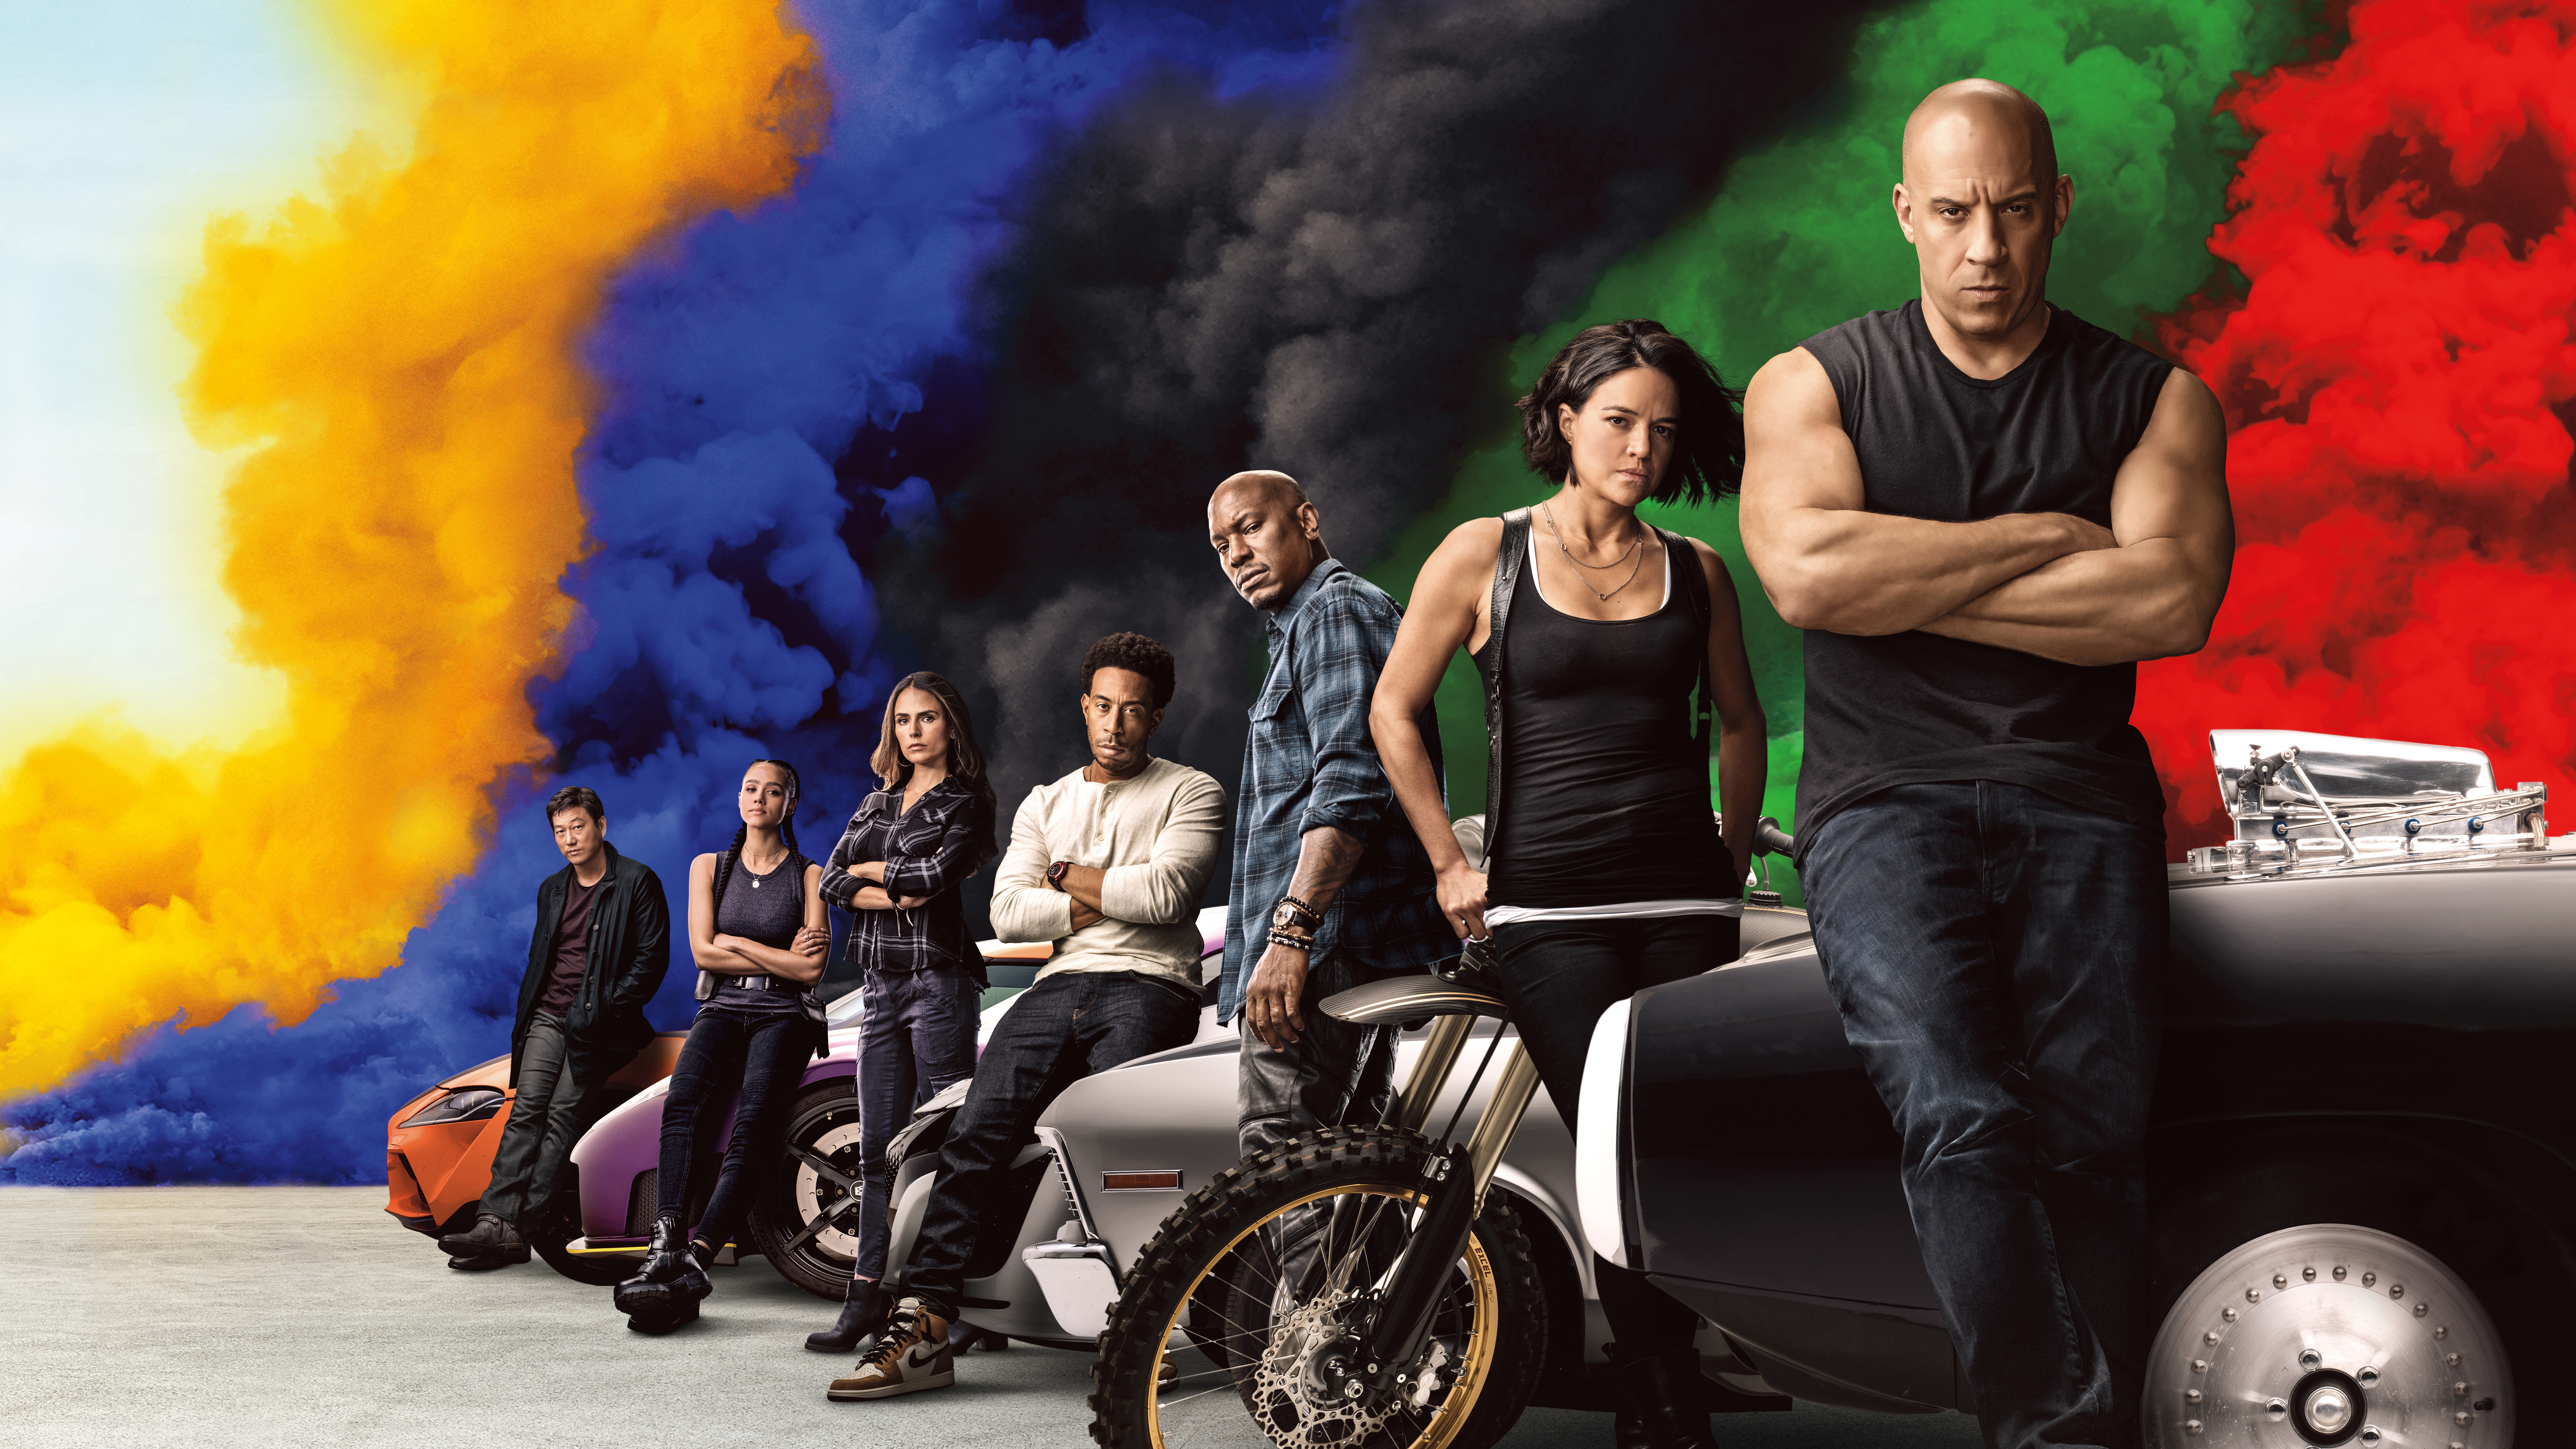 Fast Furious 8k Ultra HD Wallpaper Background Image